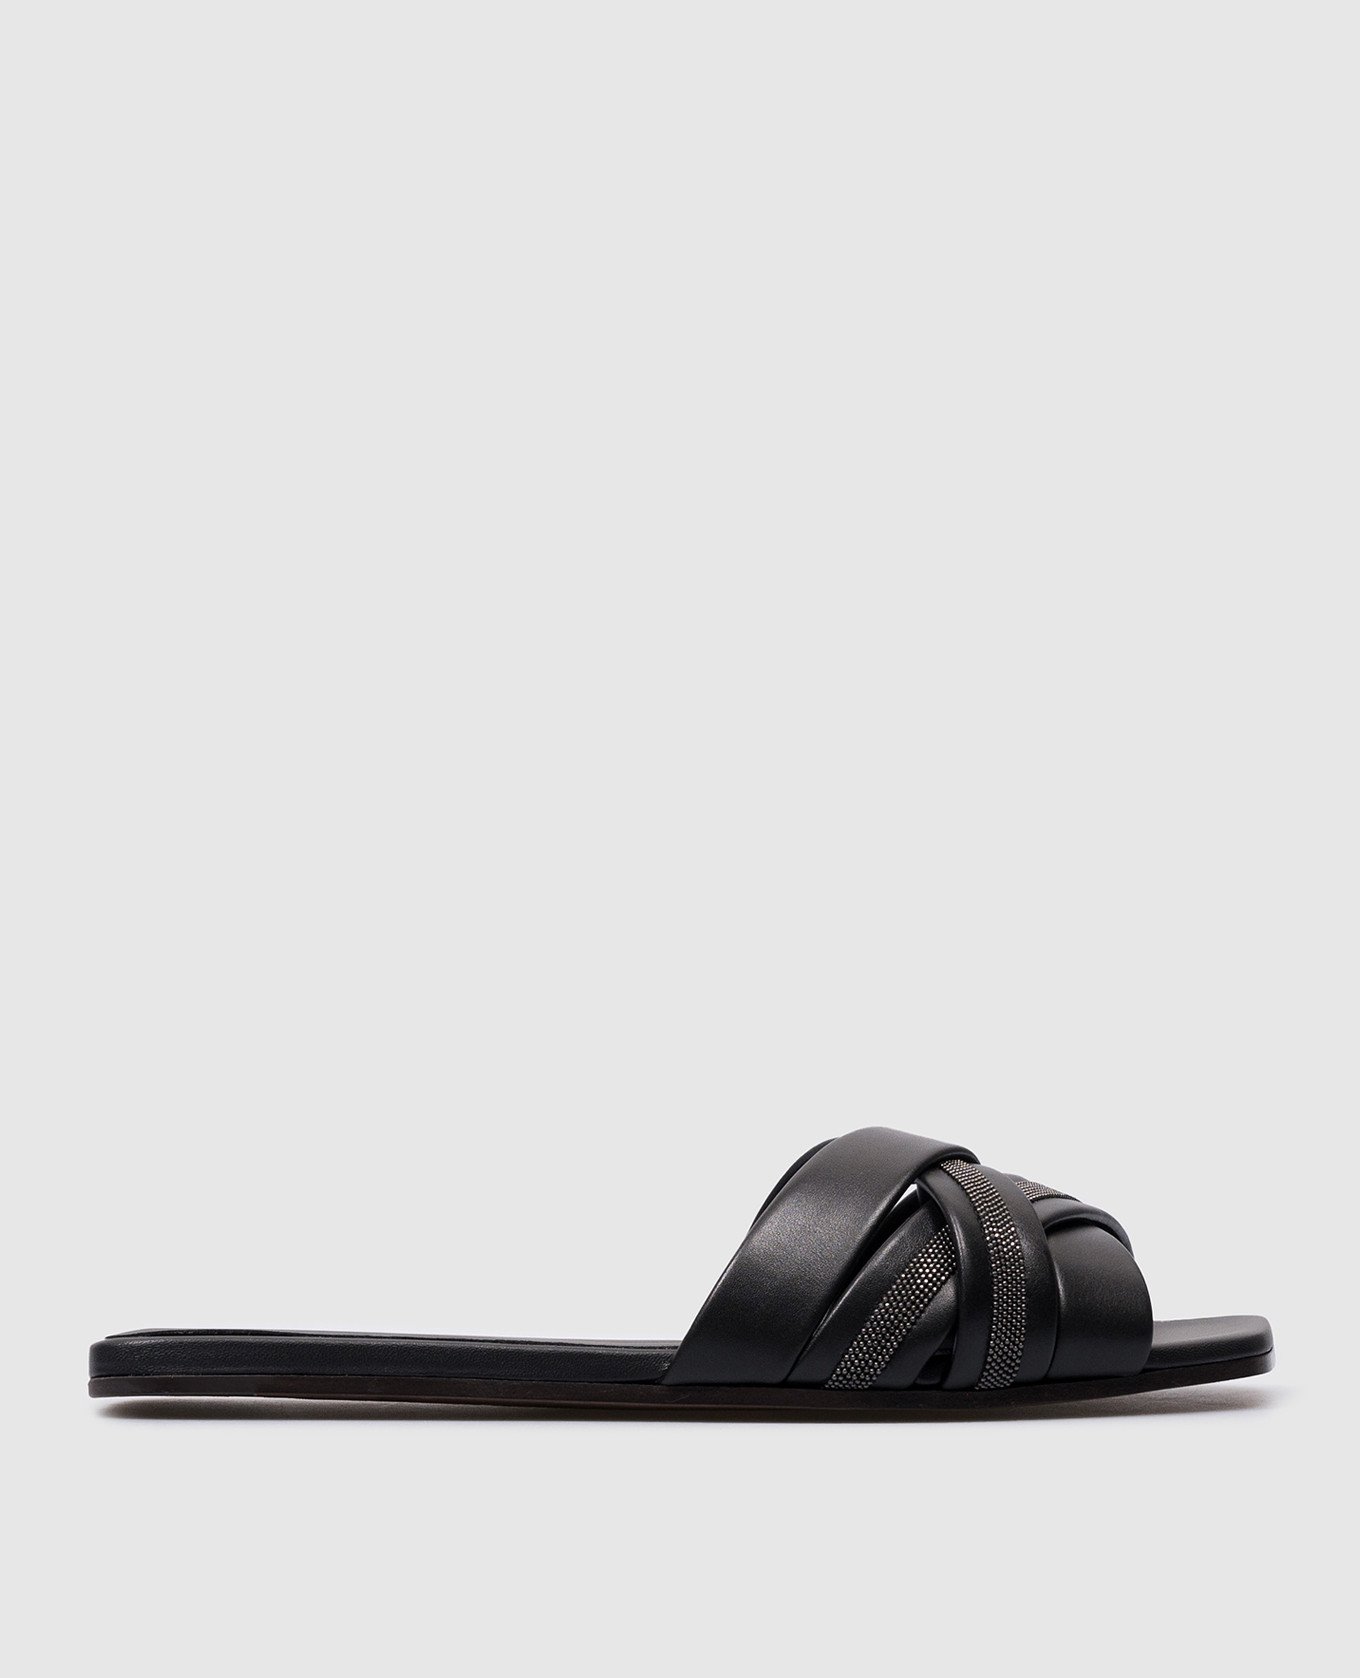 Black leather flip flops with monil chain